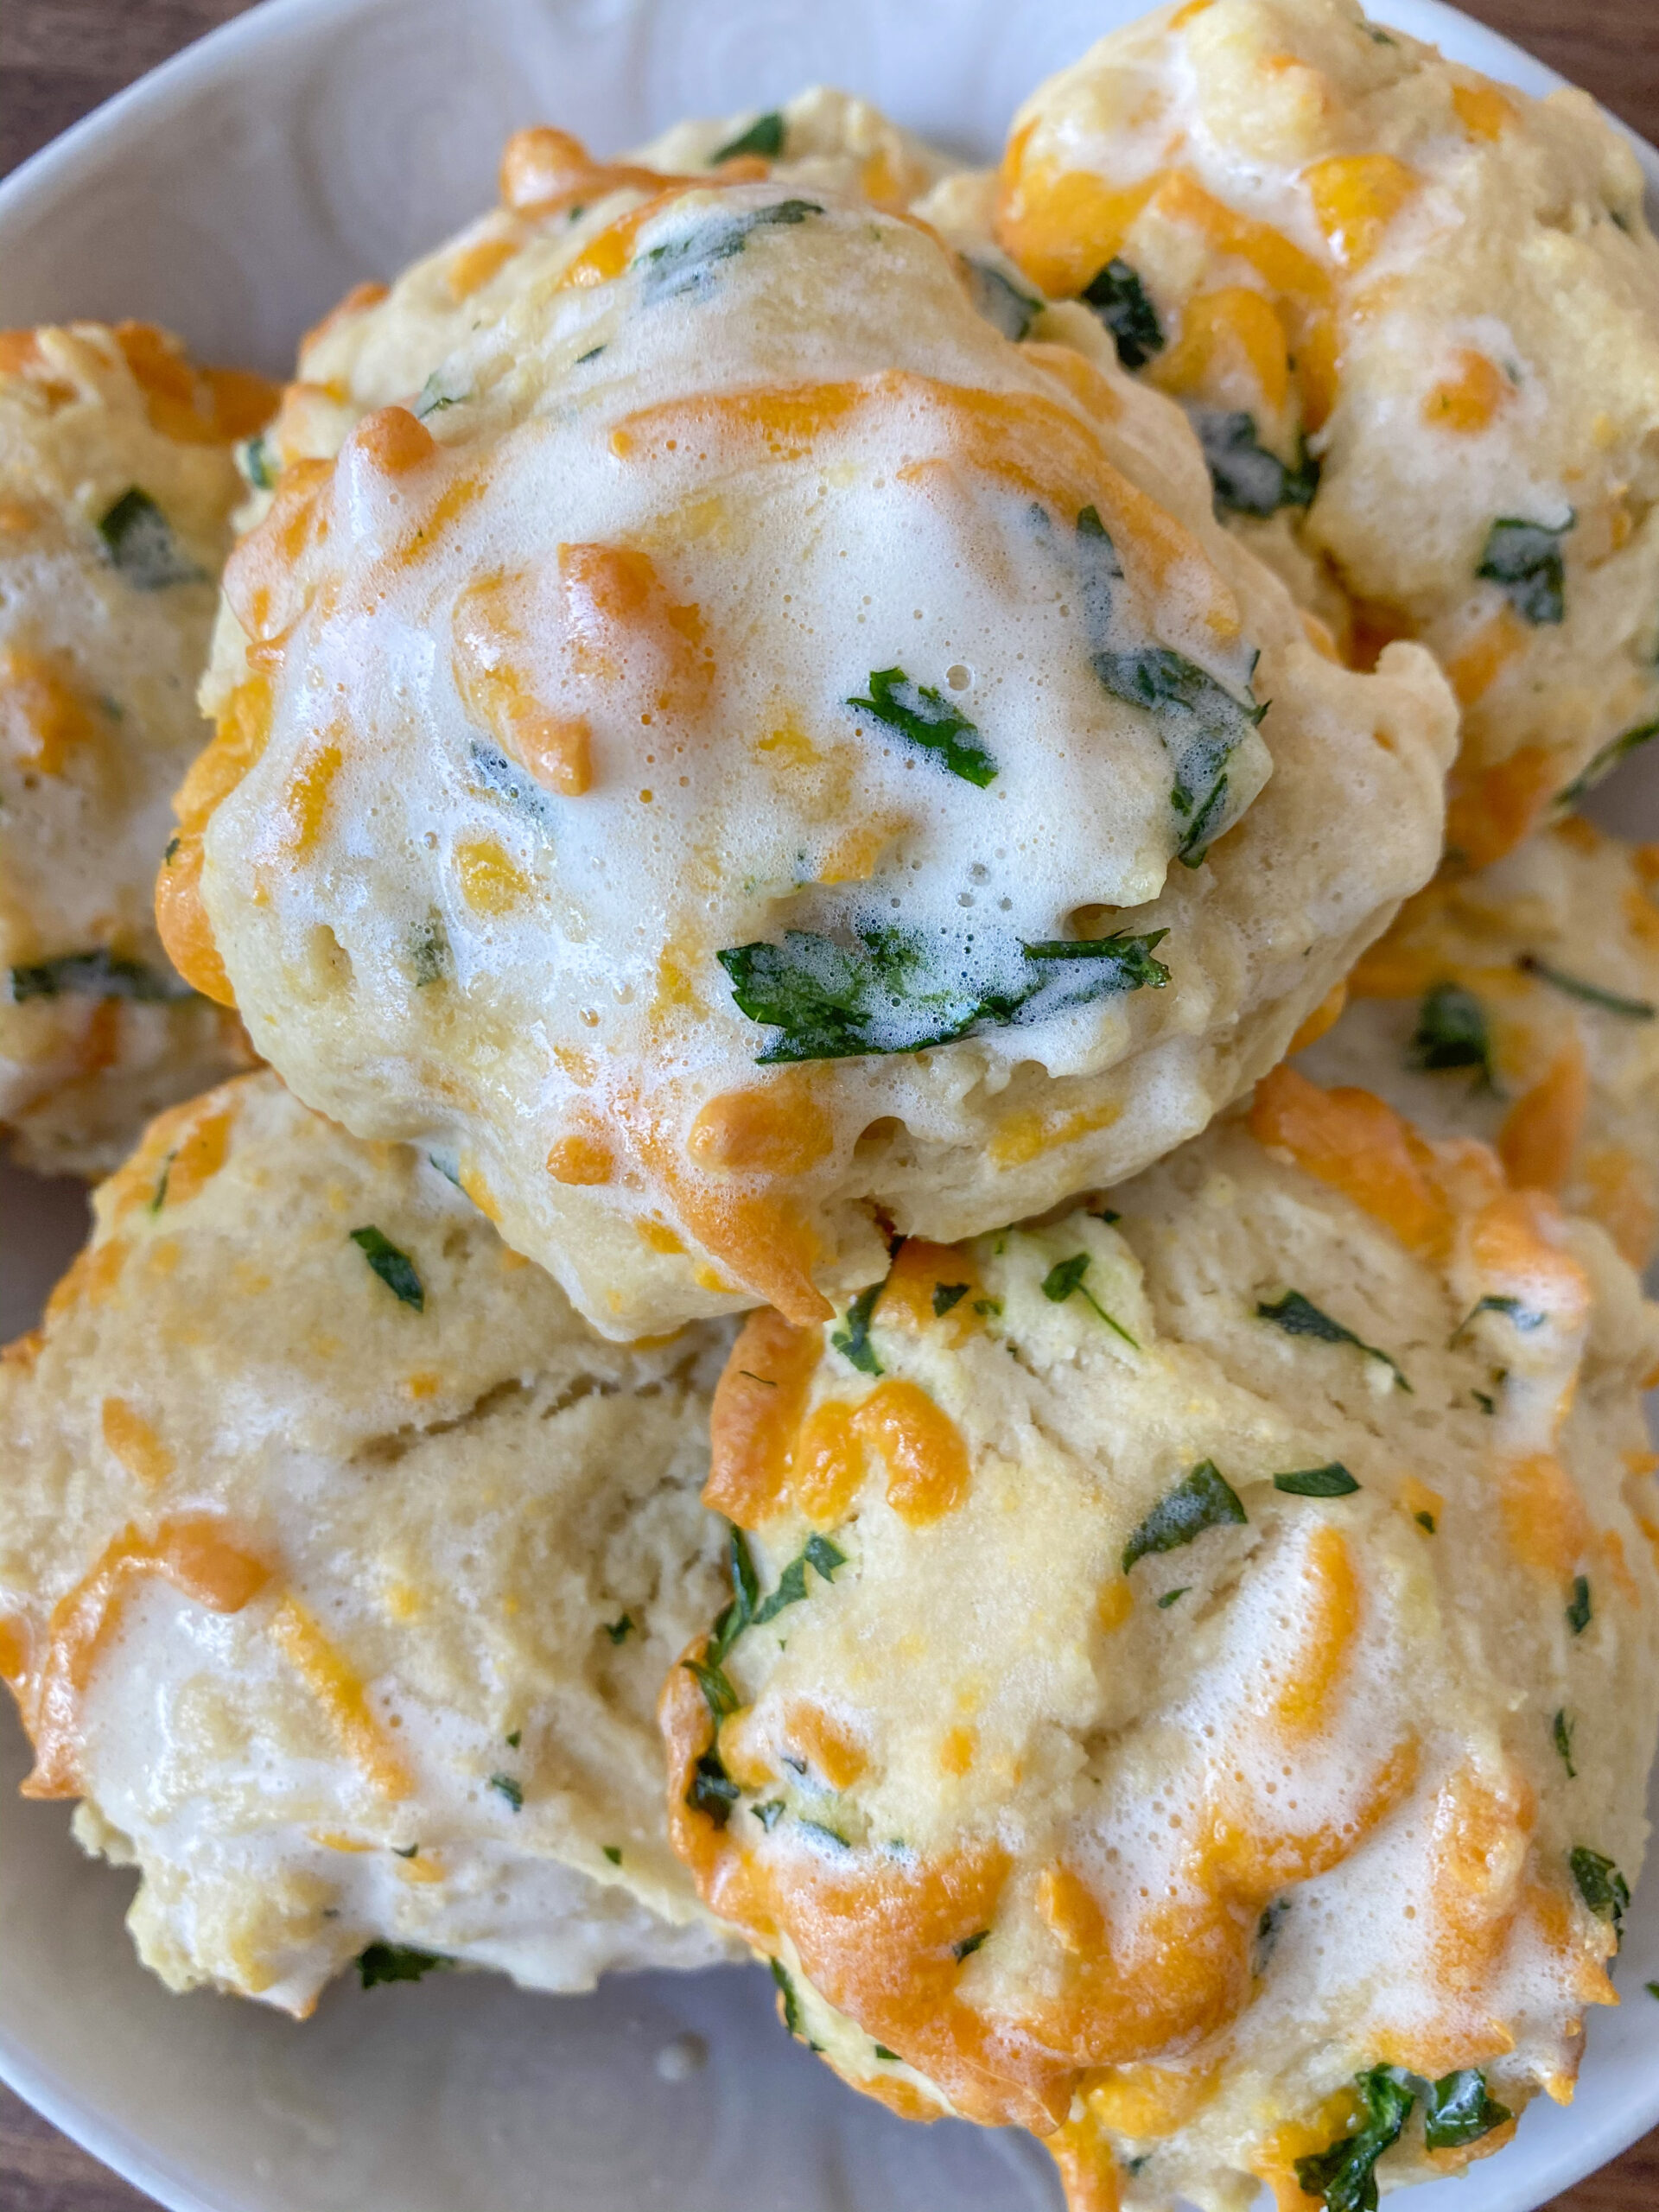 Cheddar bay biscuit with cheese, parsley, and melted butter on top.